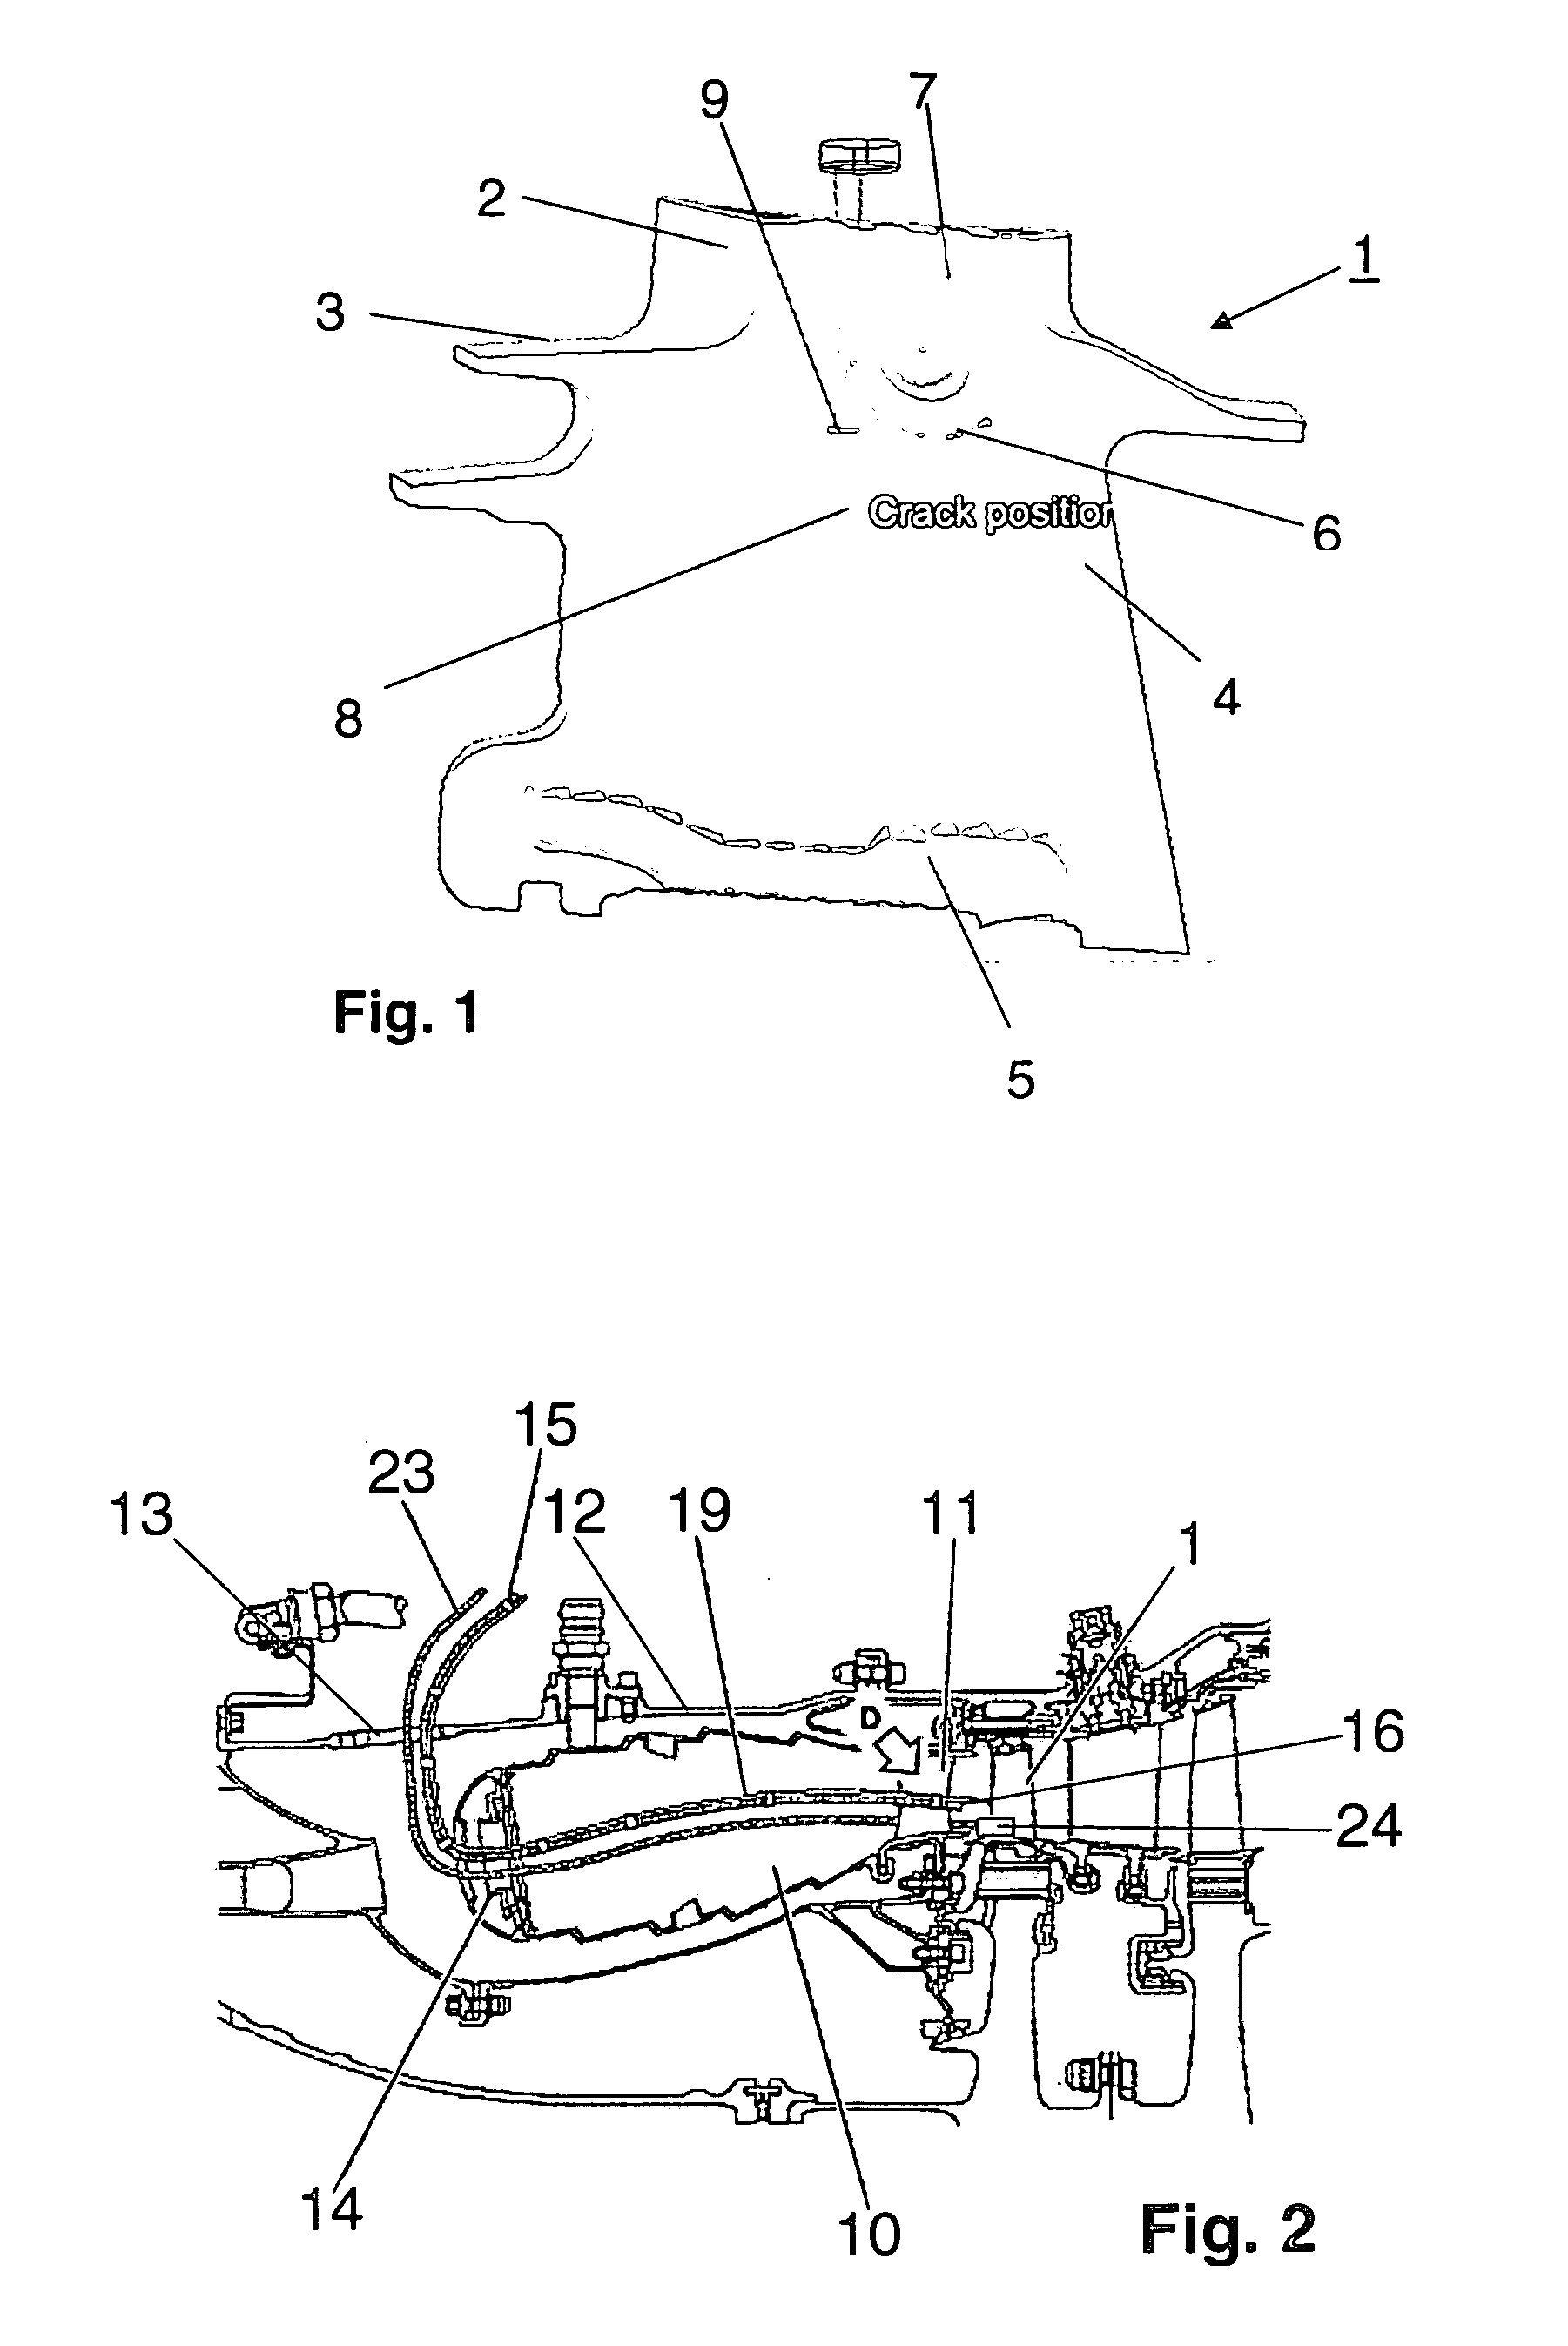 Method and apparatus for non-destructive testing of components of gas turbine engines made of monocrystalline materials